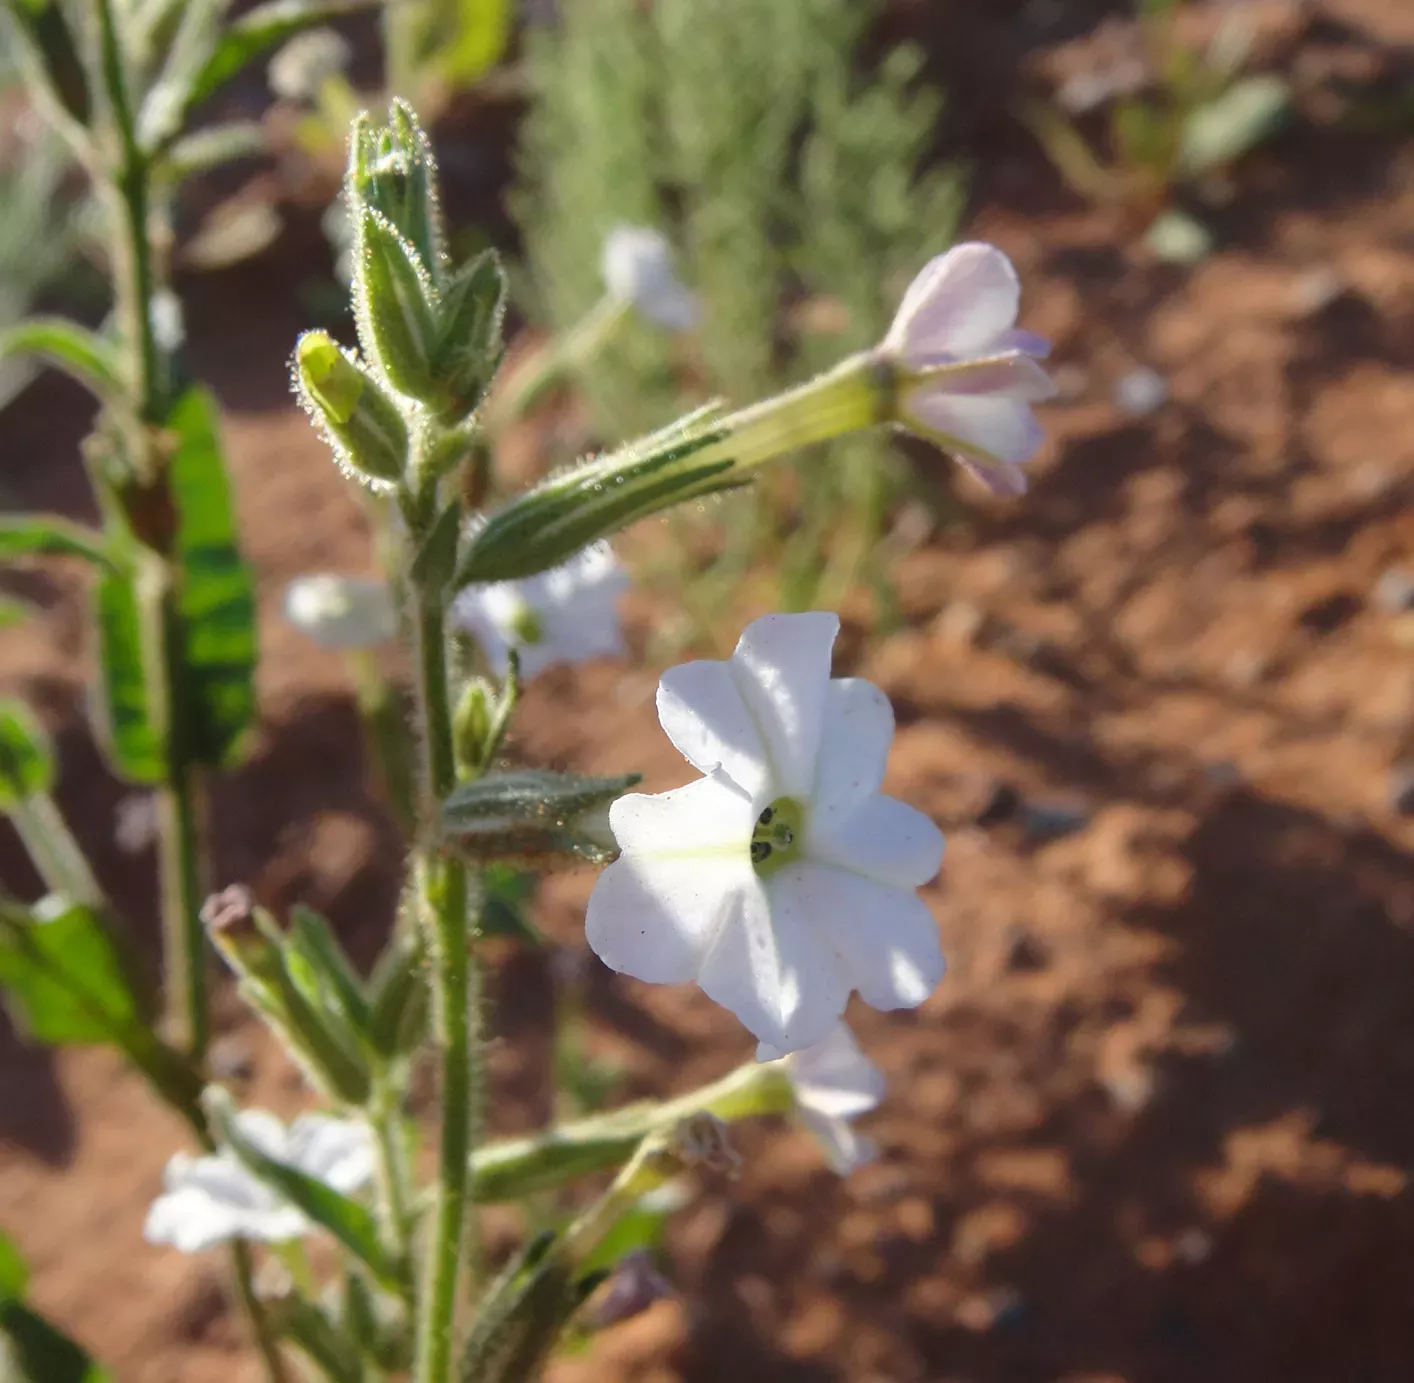 Wild tobacco plant with white flower growing on red dusty soil